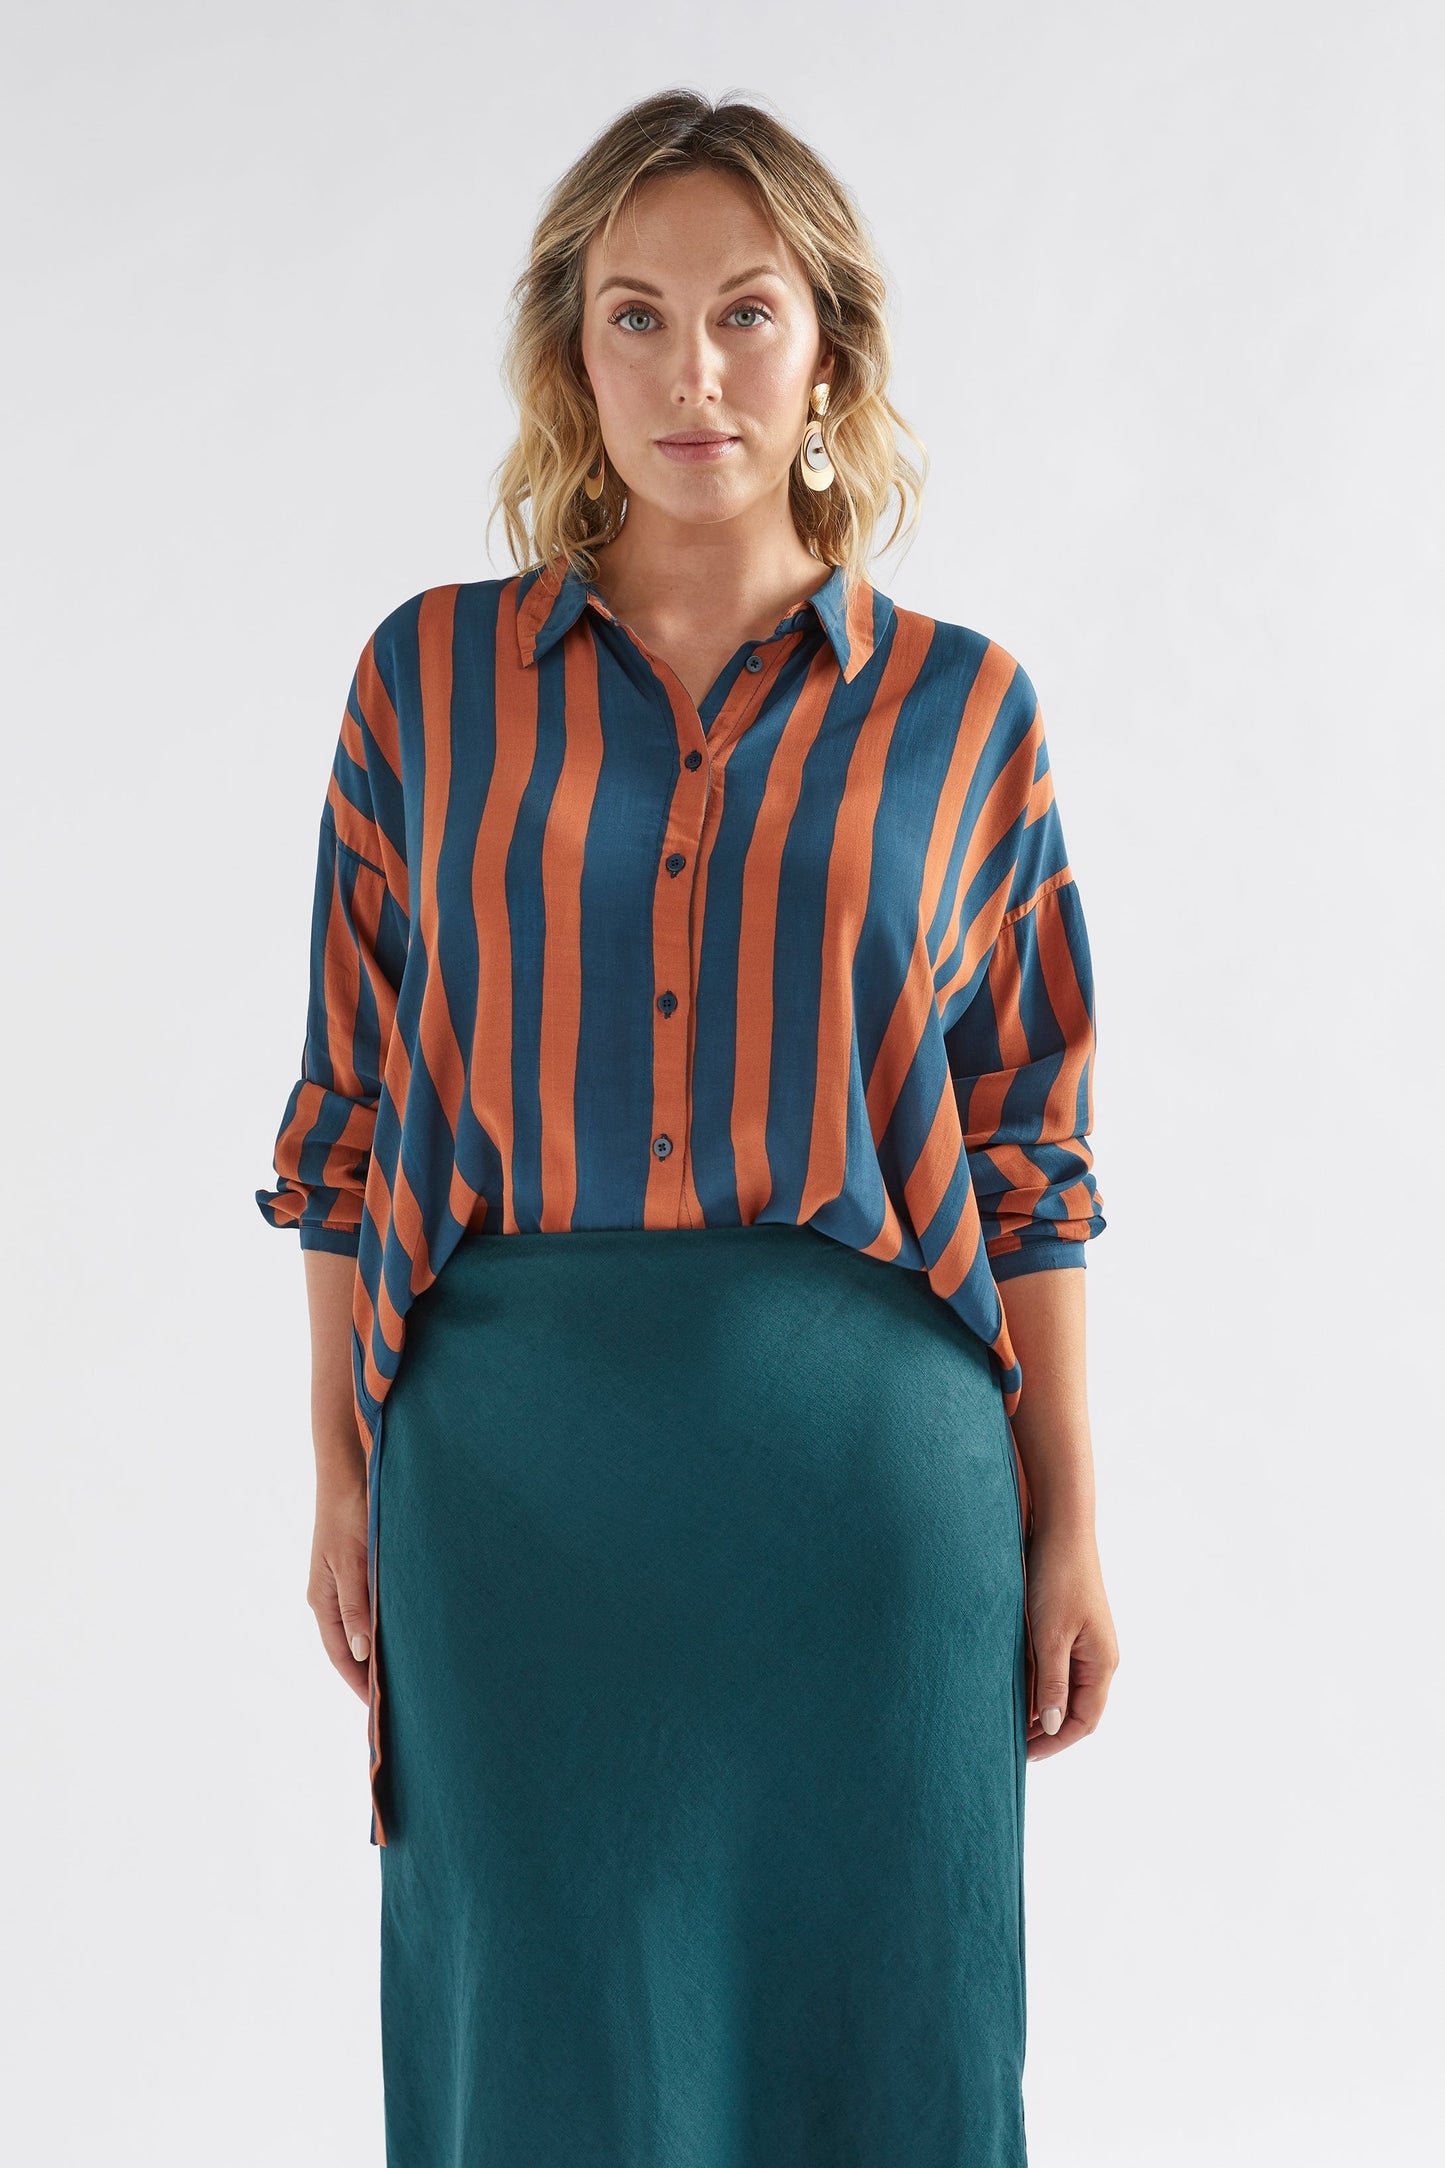 Tilbe Silky Striped Long Shirt plus Model front untucked | BRONZE TEAL PAINT STRIPE